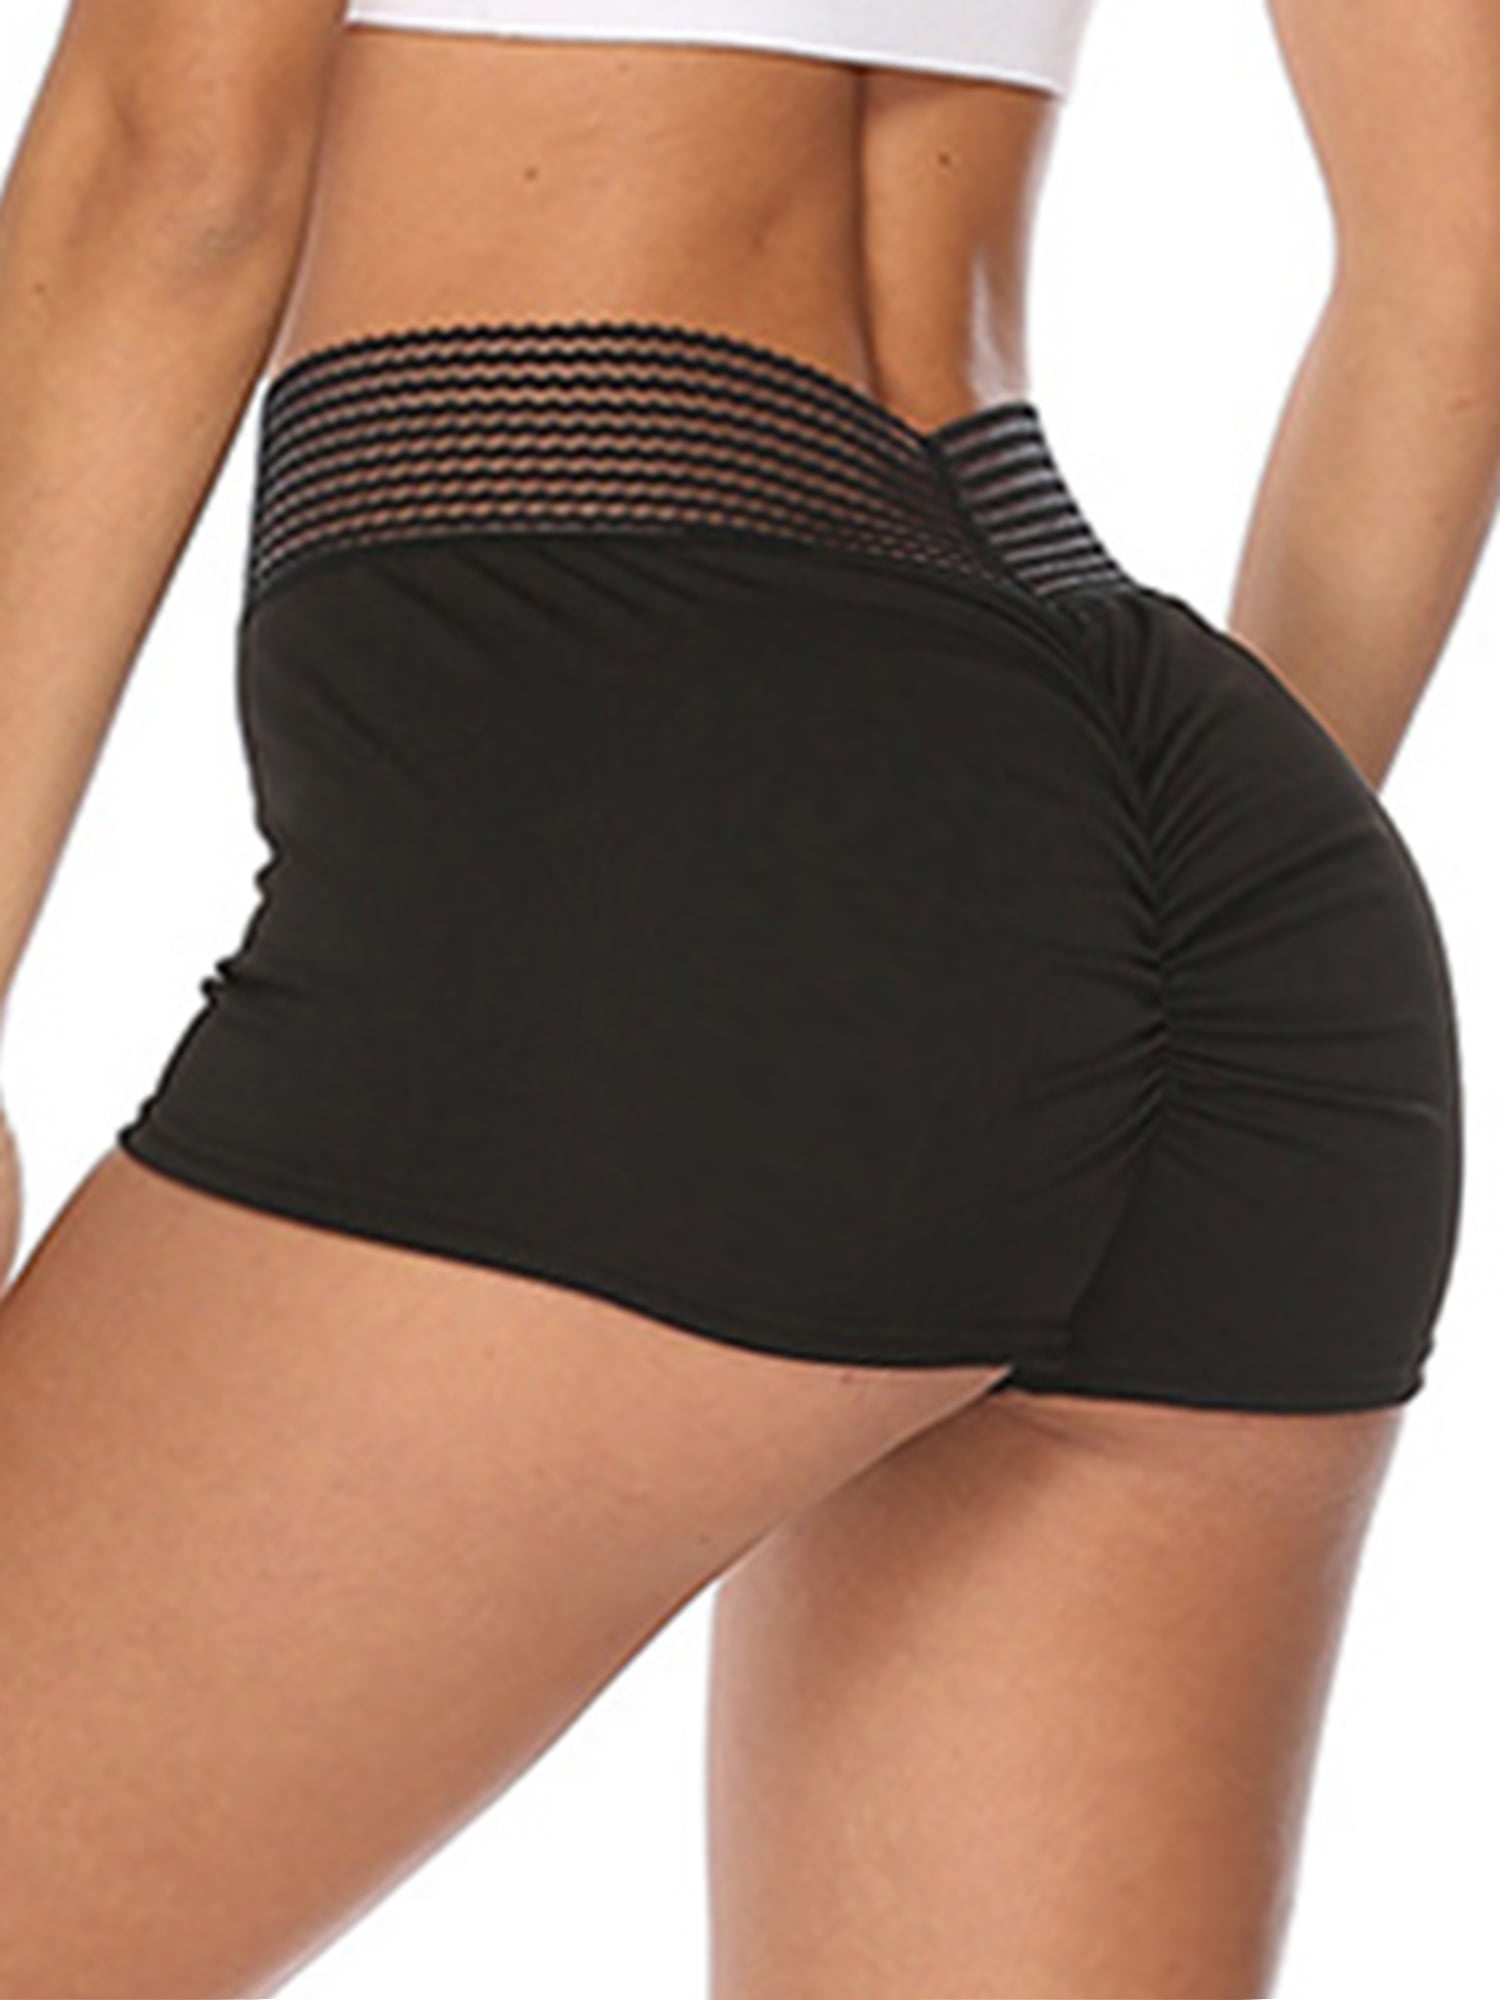 Biker Shorts For Women High Waisted Workout Butt Lifting Shorts Yoga Shorts For Athletic Running